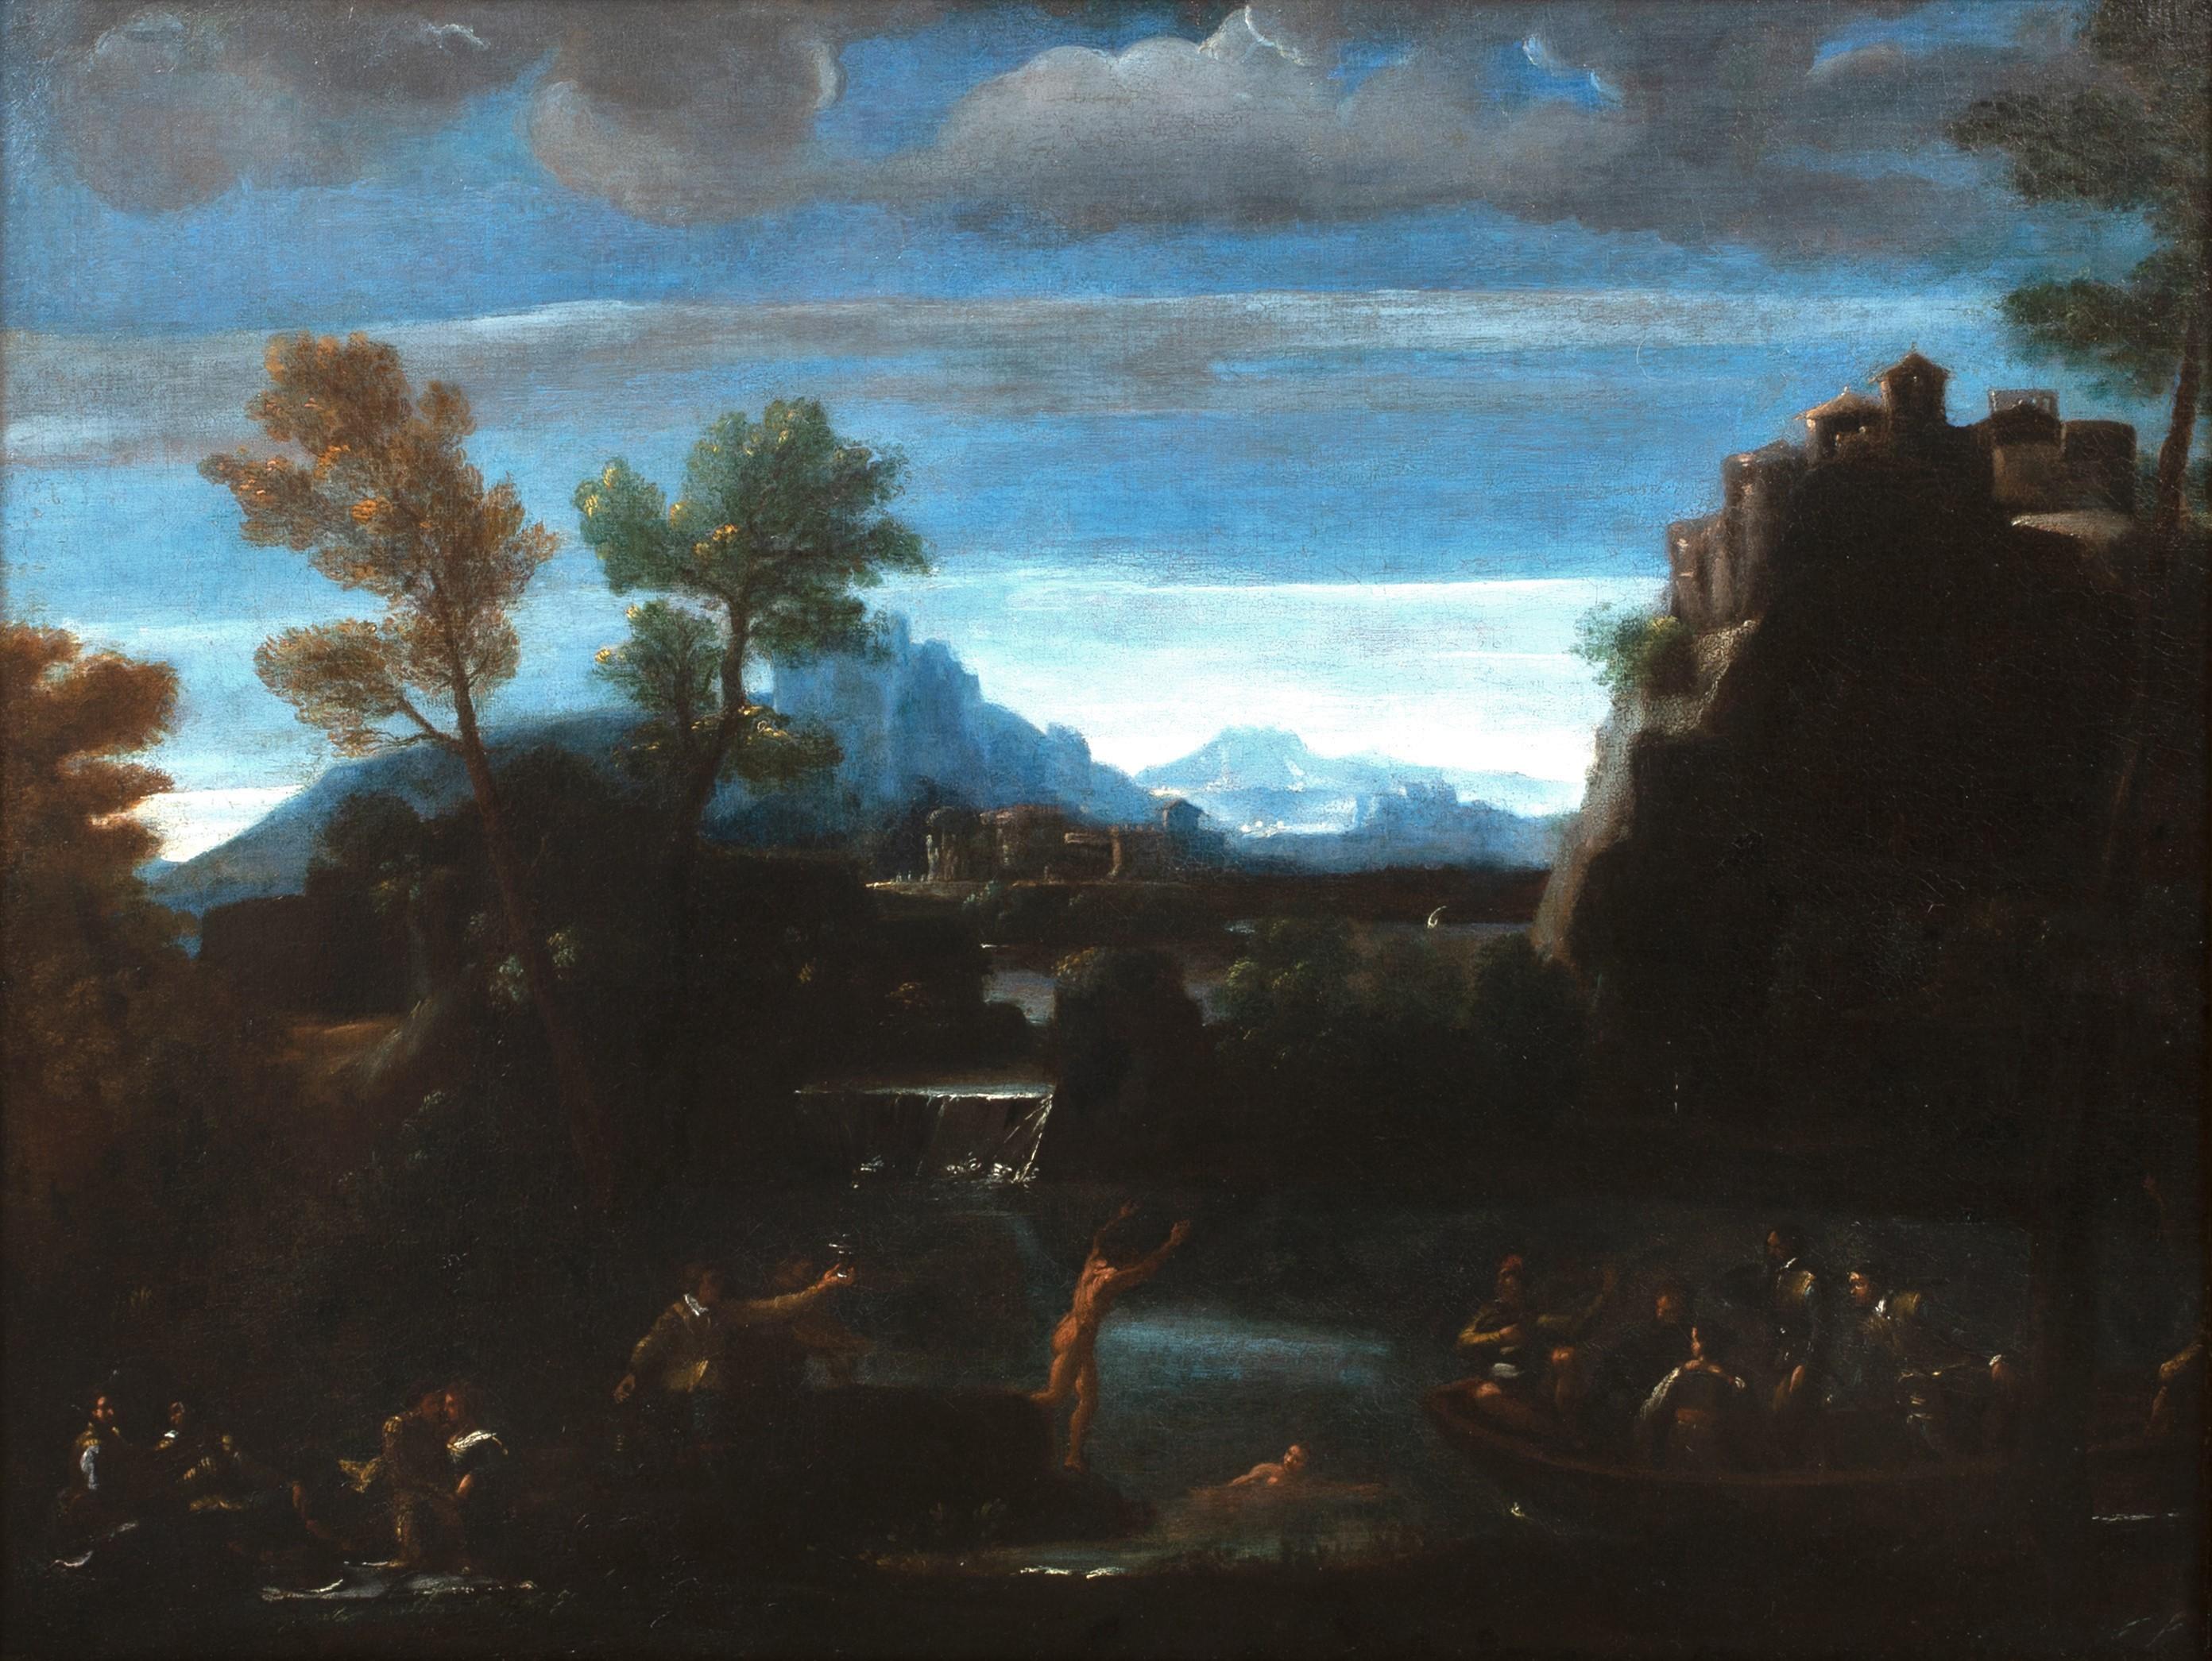 Bathers On A Mountainous River Landscape, 17th Century - Painting by Unknown